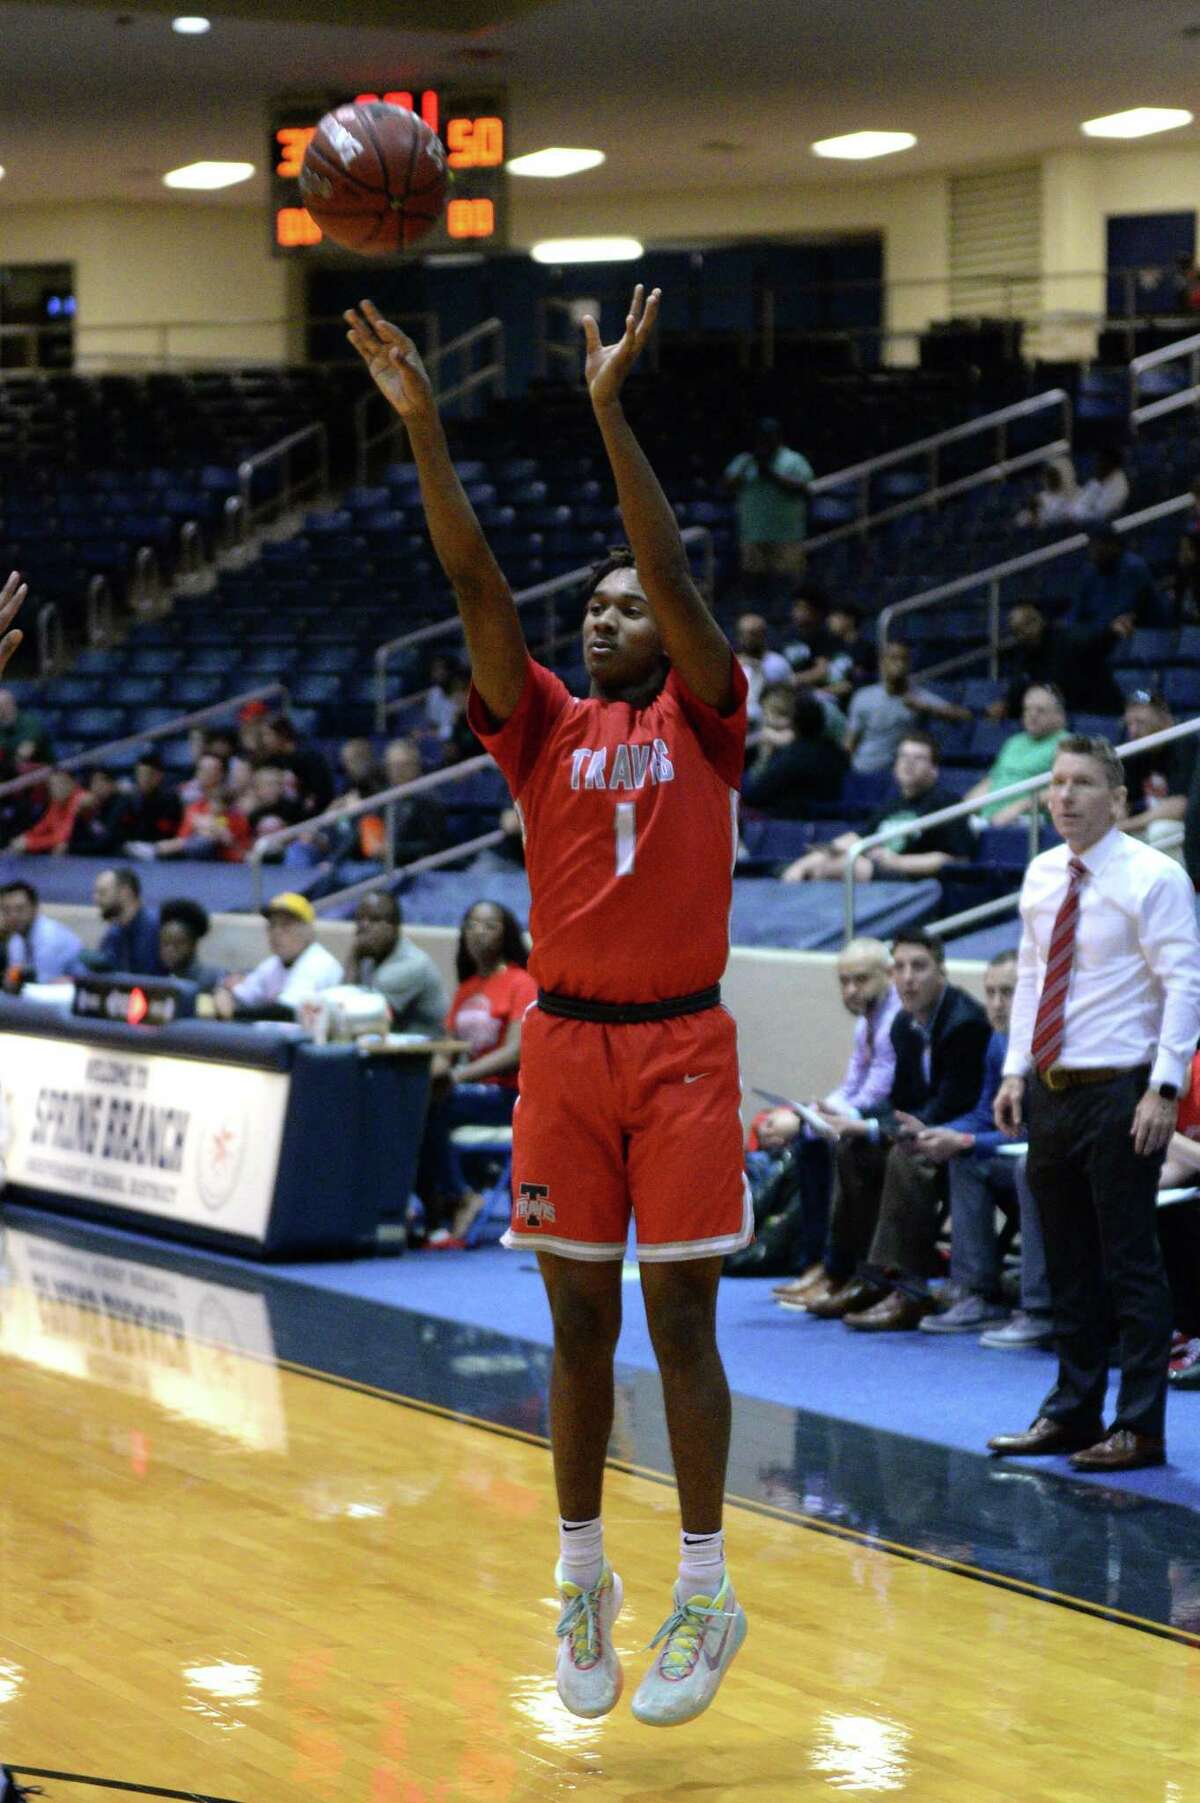 Mekhi McIntyre (1) of Travis attempts a 3-point shot during the third quarter of a Boys 6A Region III Bi-District play-off game between the Mayde Creek Rams and the Travis Tigers on Tuesday, February 25, 2020 at Coleman Coliseum, Houston, TX.